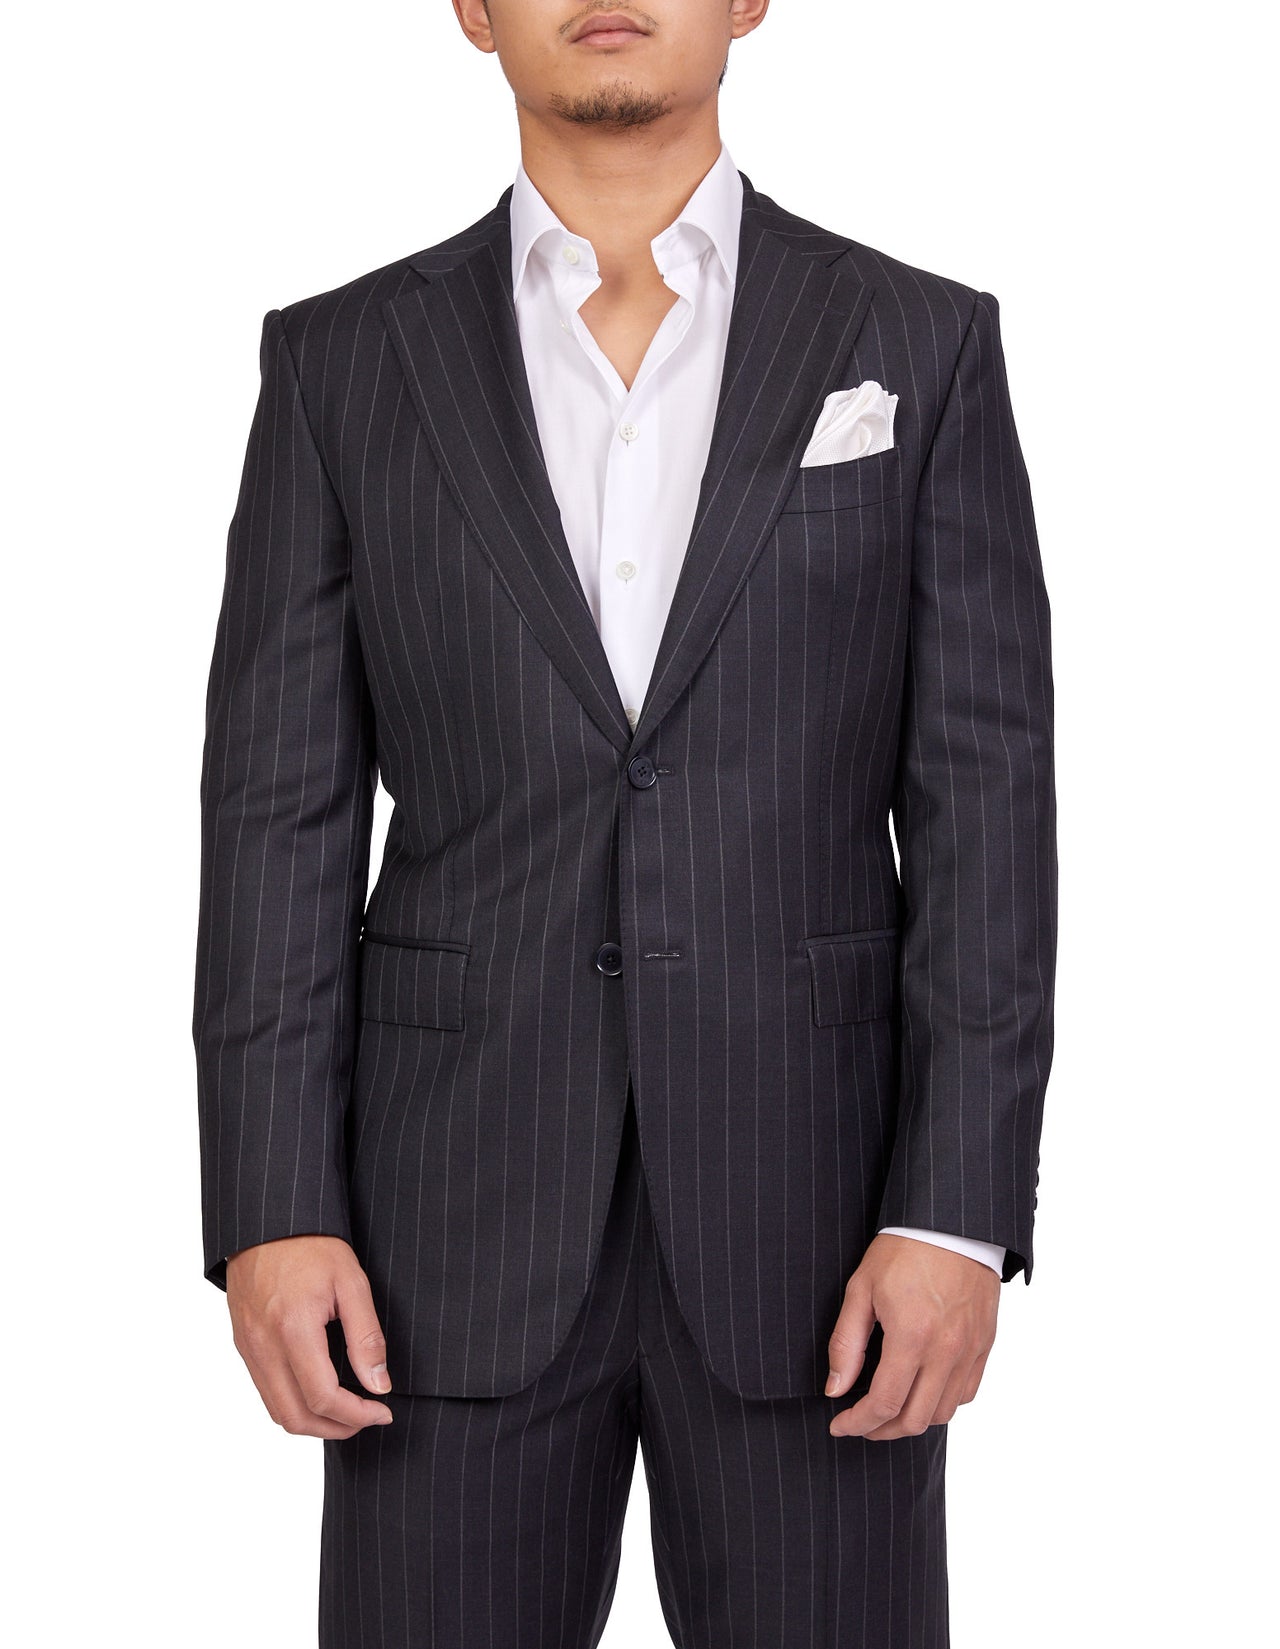 HENRY SARTORIAL Dun Full Canvas R-Stripe Suit CHARCOAL LG